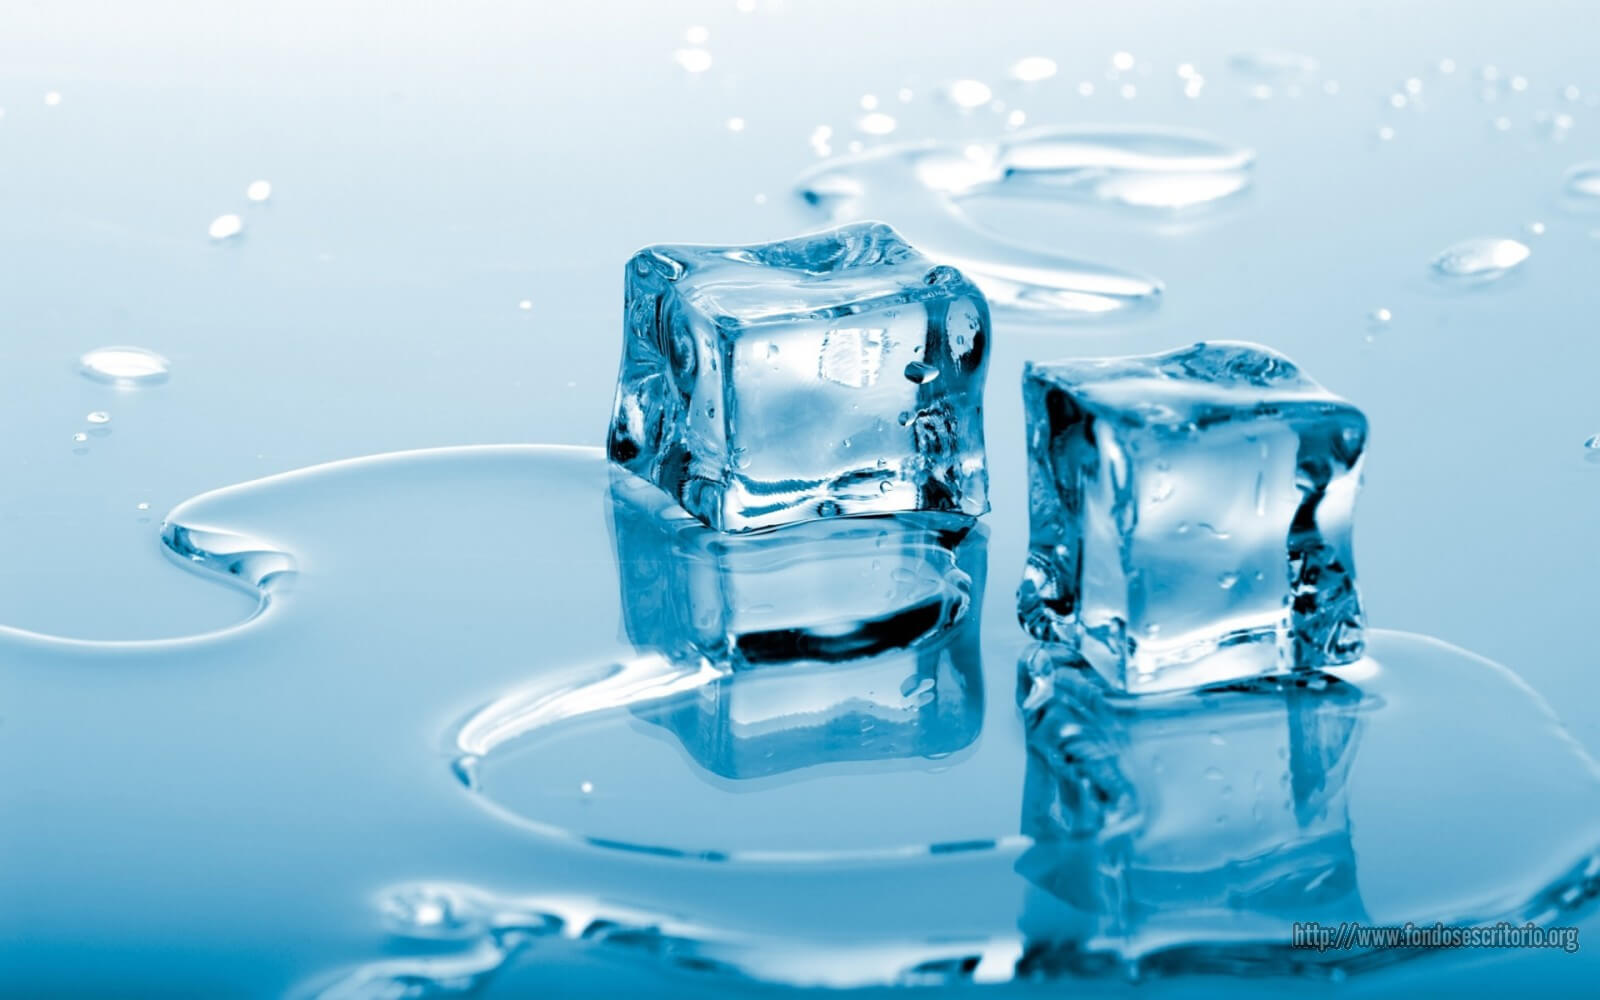 Two ice cubes melting on a piece of glass